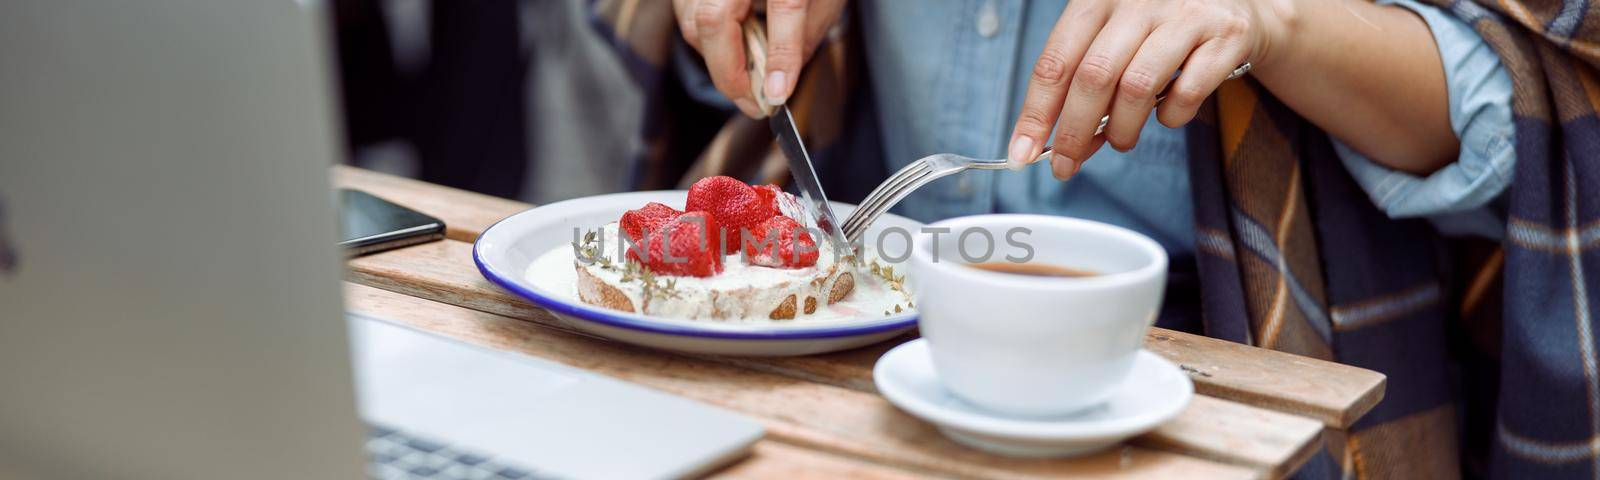 Mature woman eats tasty toast with cut strawberries and cream near laptop and cup of coffee at table on outdoors cafe terrace closeup